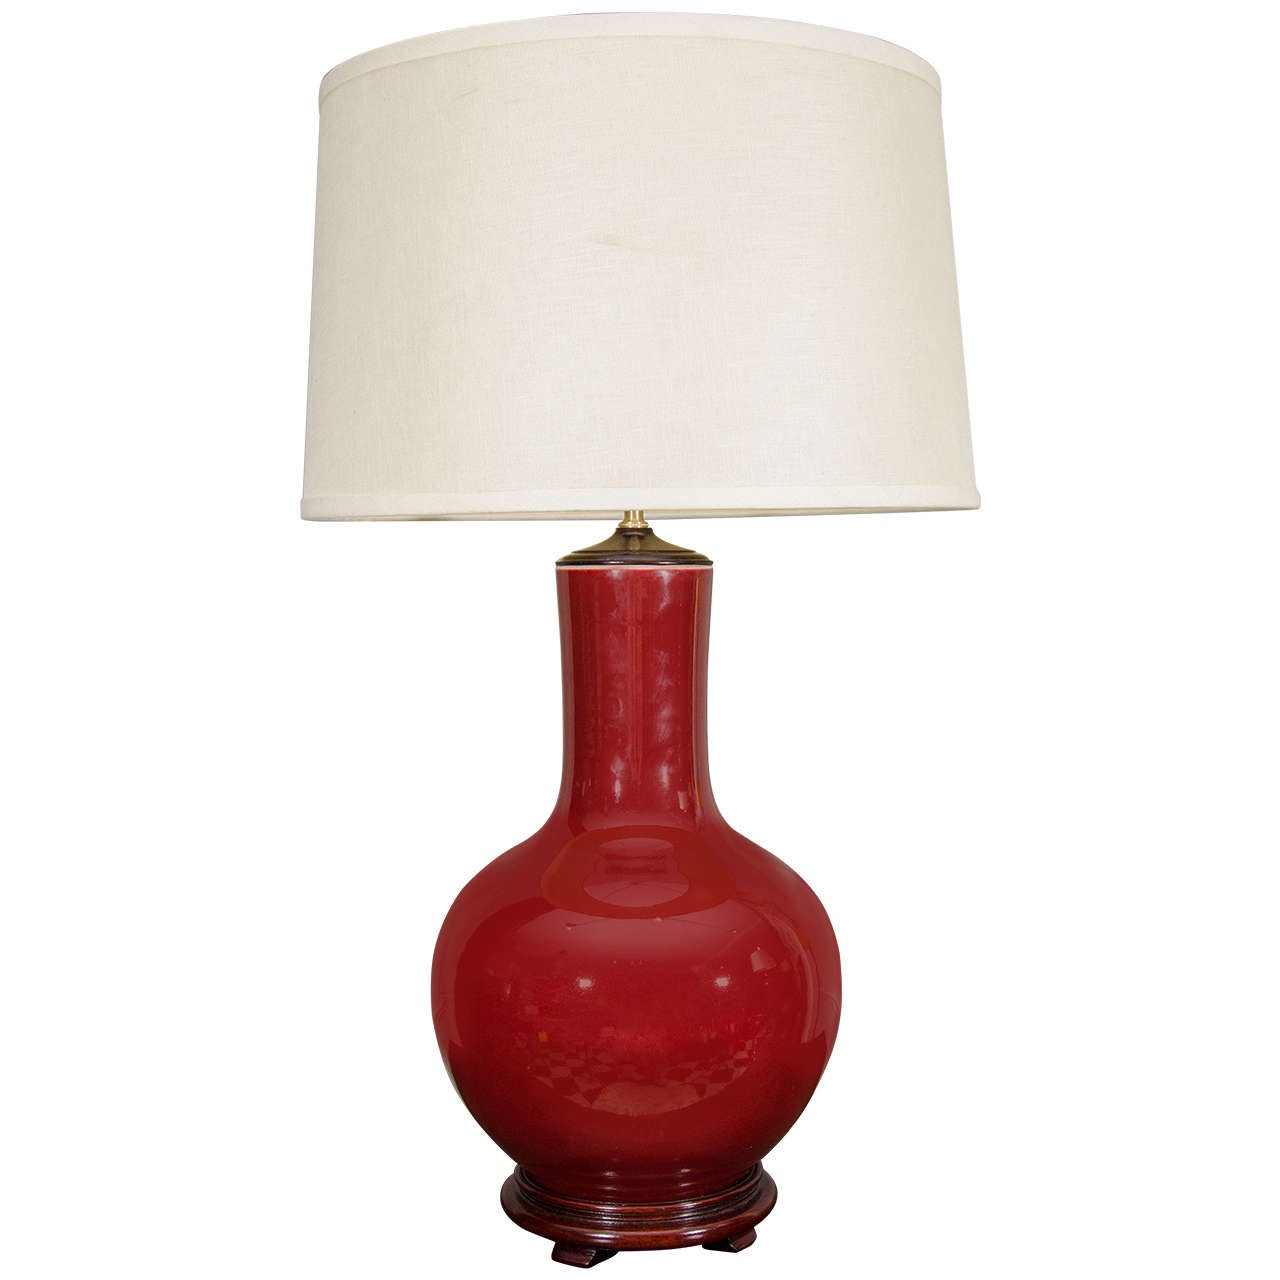 Single Chinese Langyao Hong Oxblood Red Porcelain Vase, Wired as a Lamp For Sale